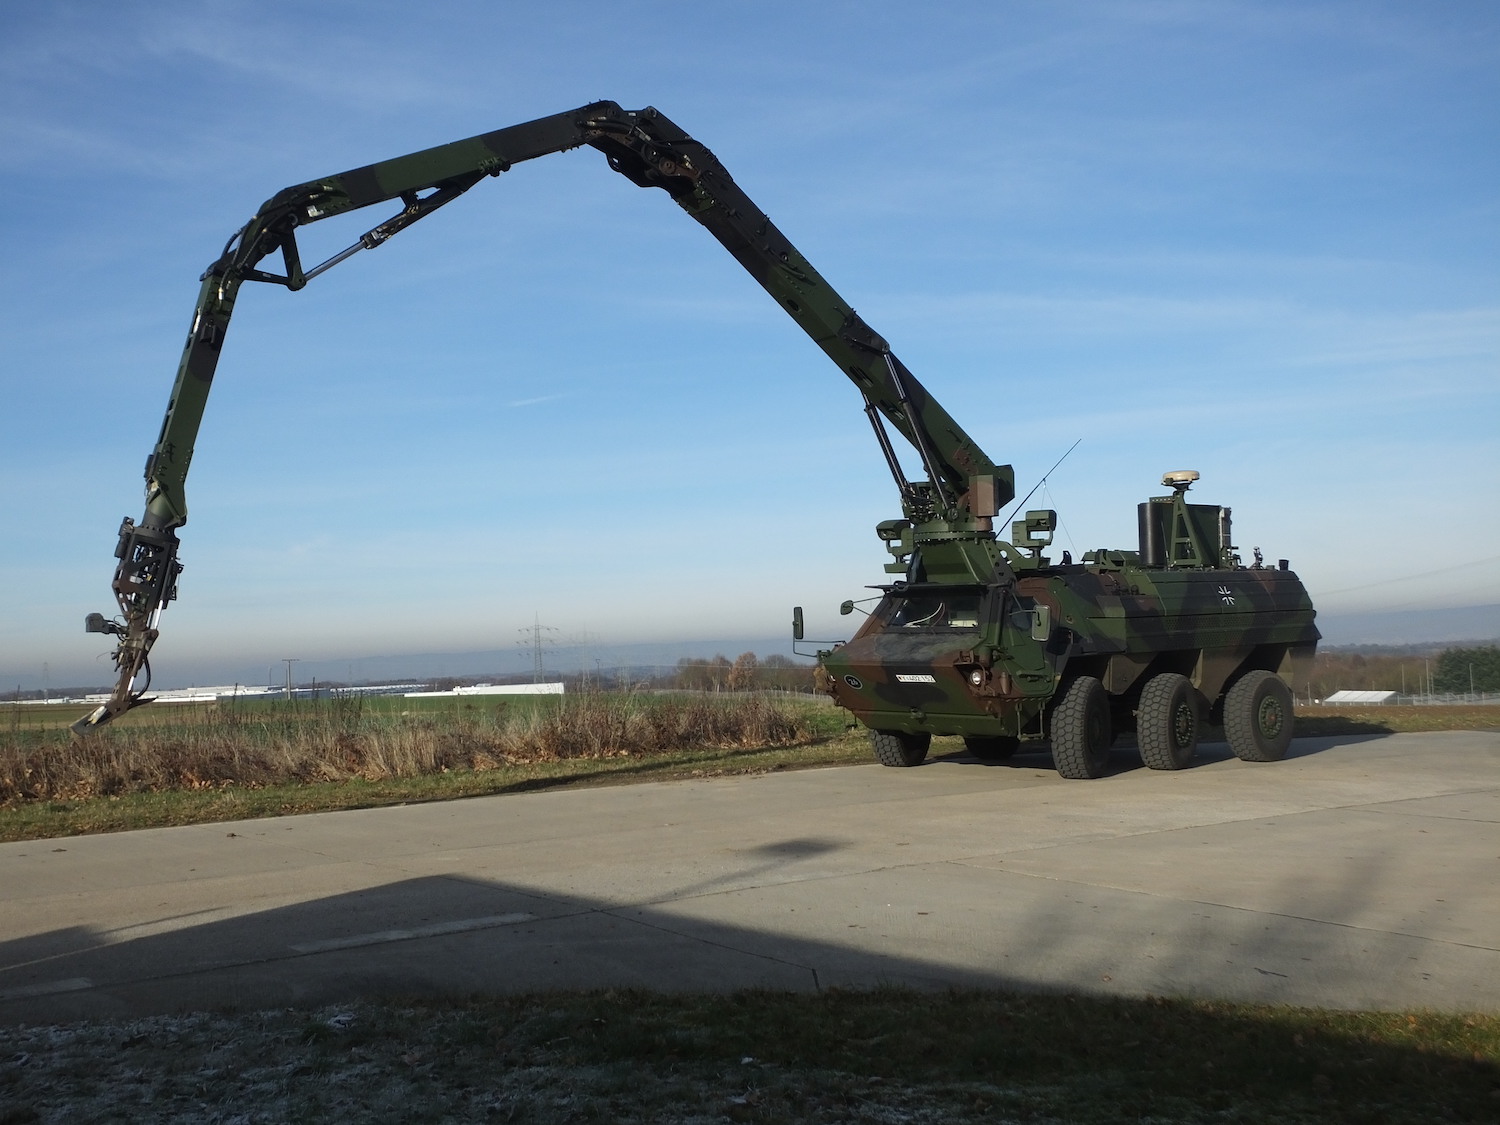 This 1.9-ton steel arm can spot bombs and lift soldiers out of harm’s way